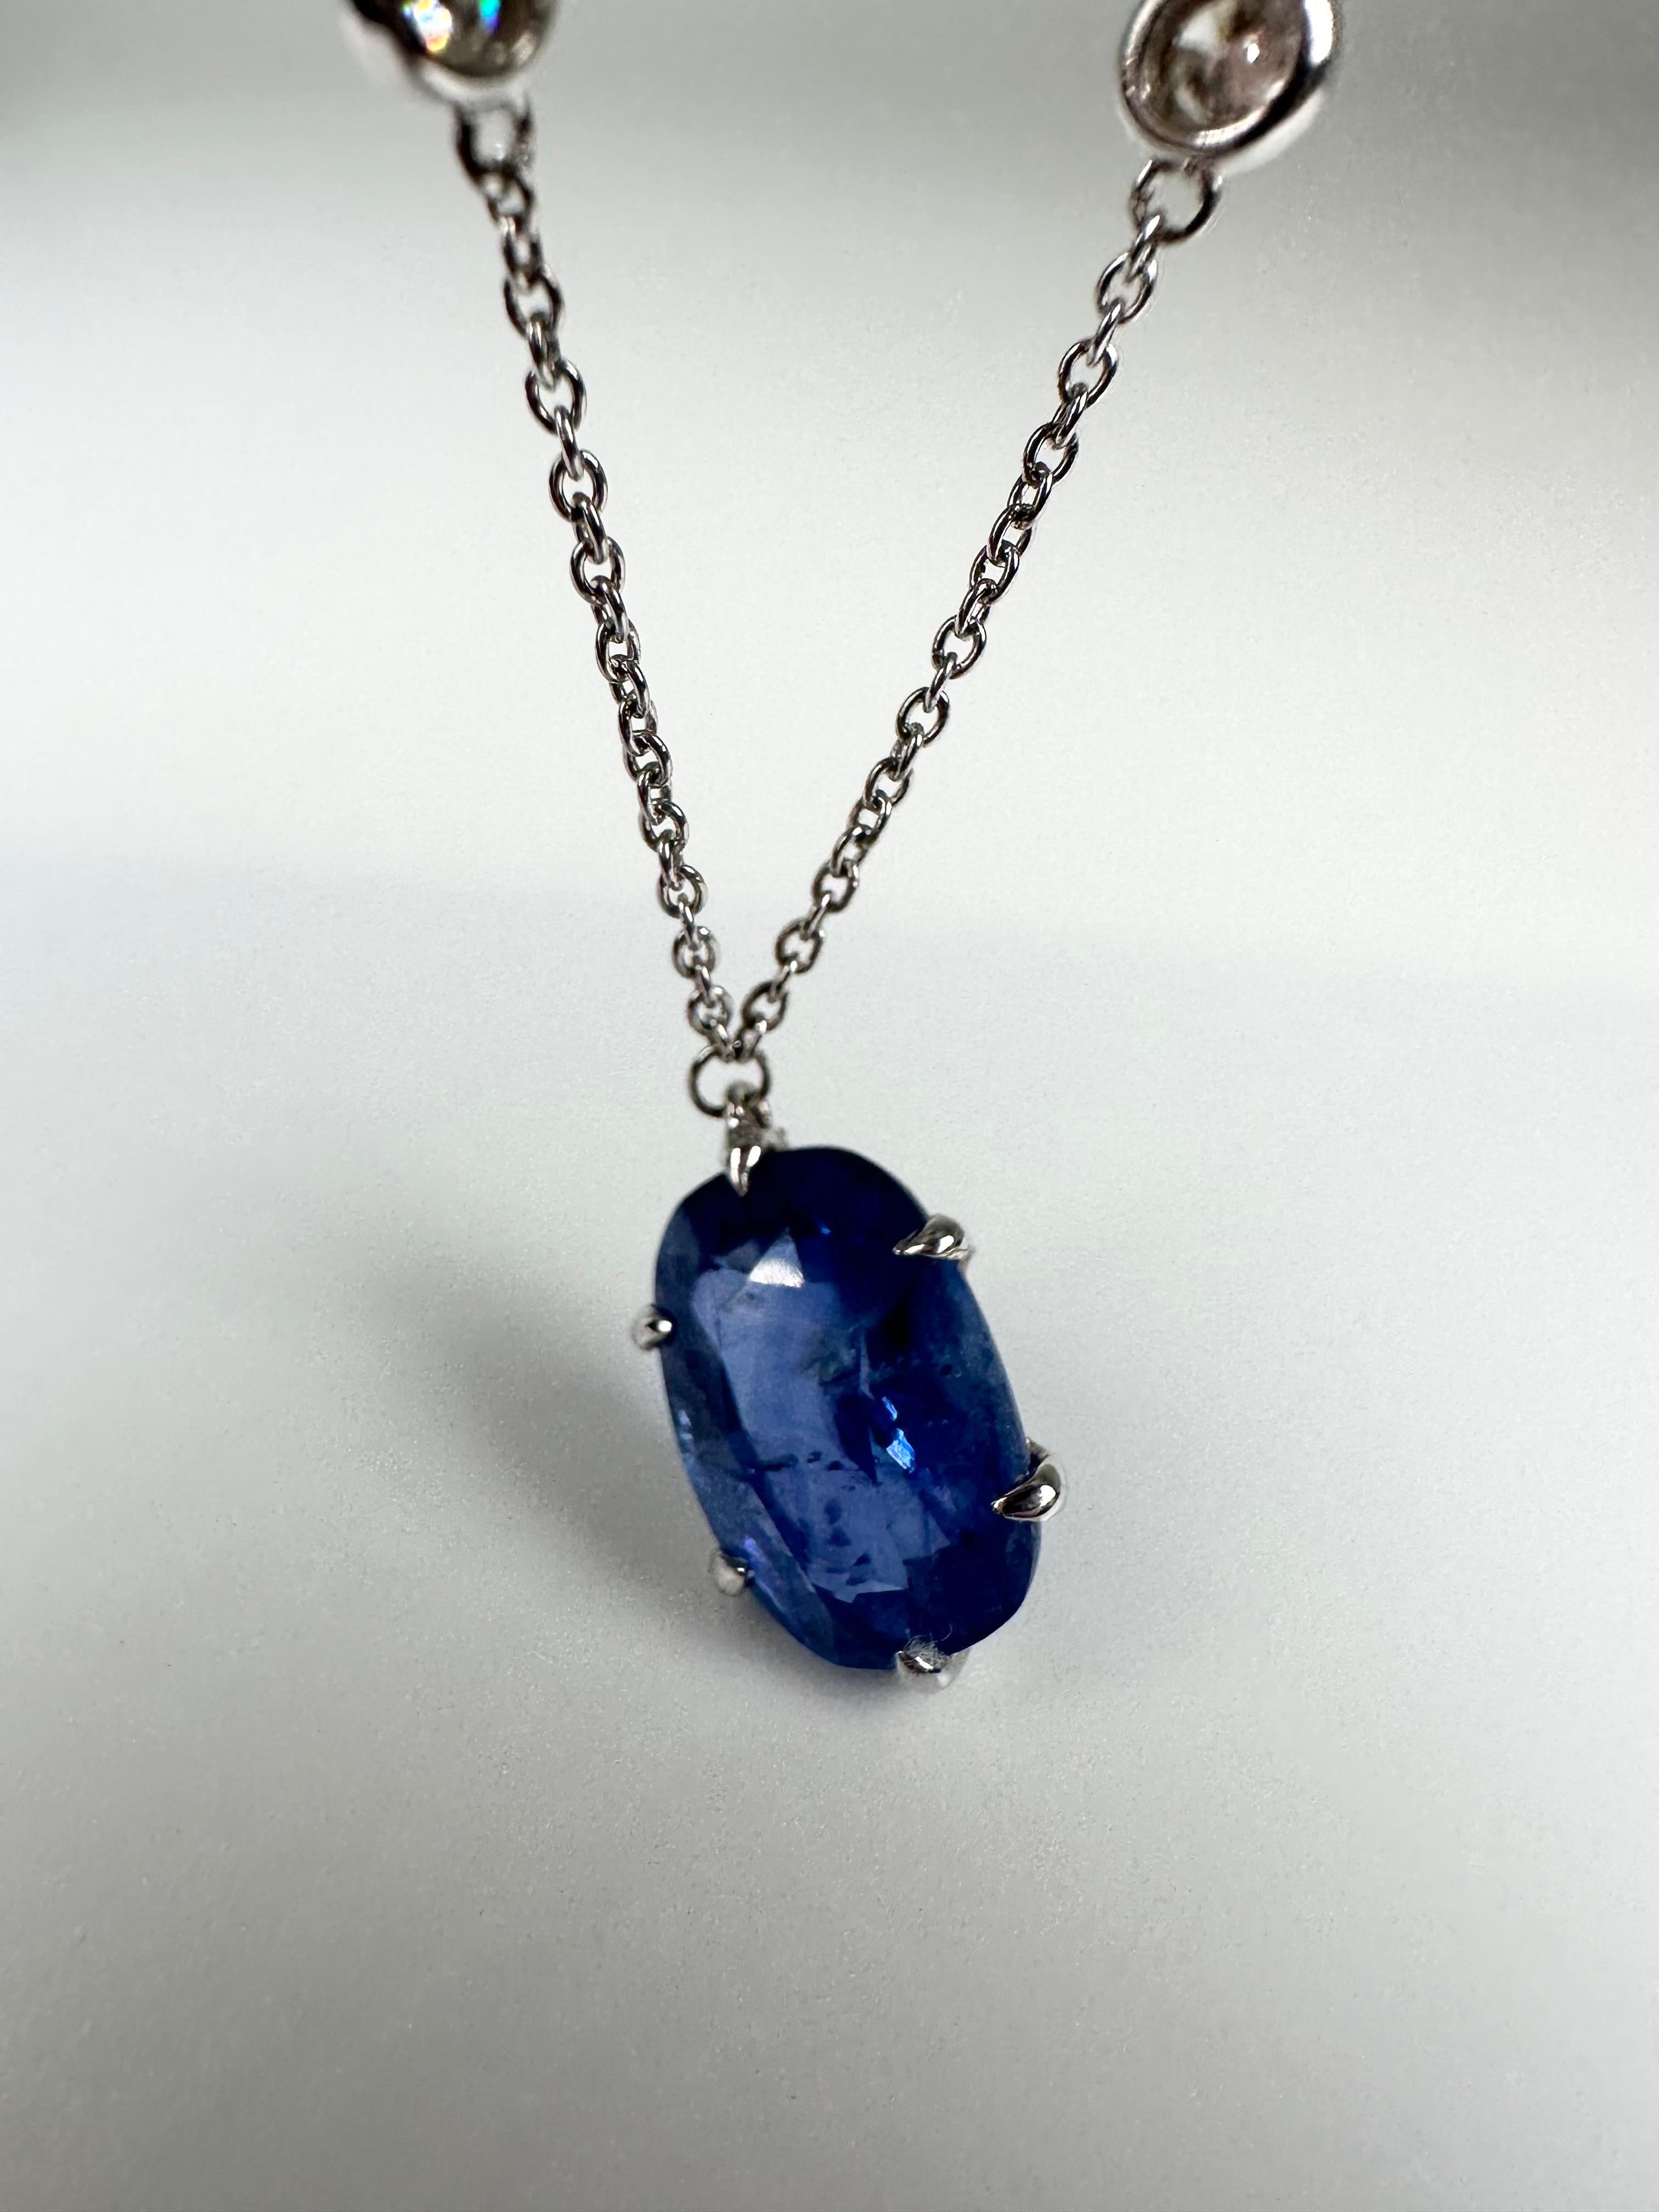 Rare Large Sapphire Diamond Pendant Necklace by the Yard 14kt 5.14ct Sapphire For Sale 3